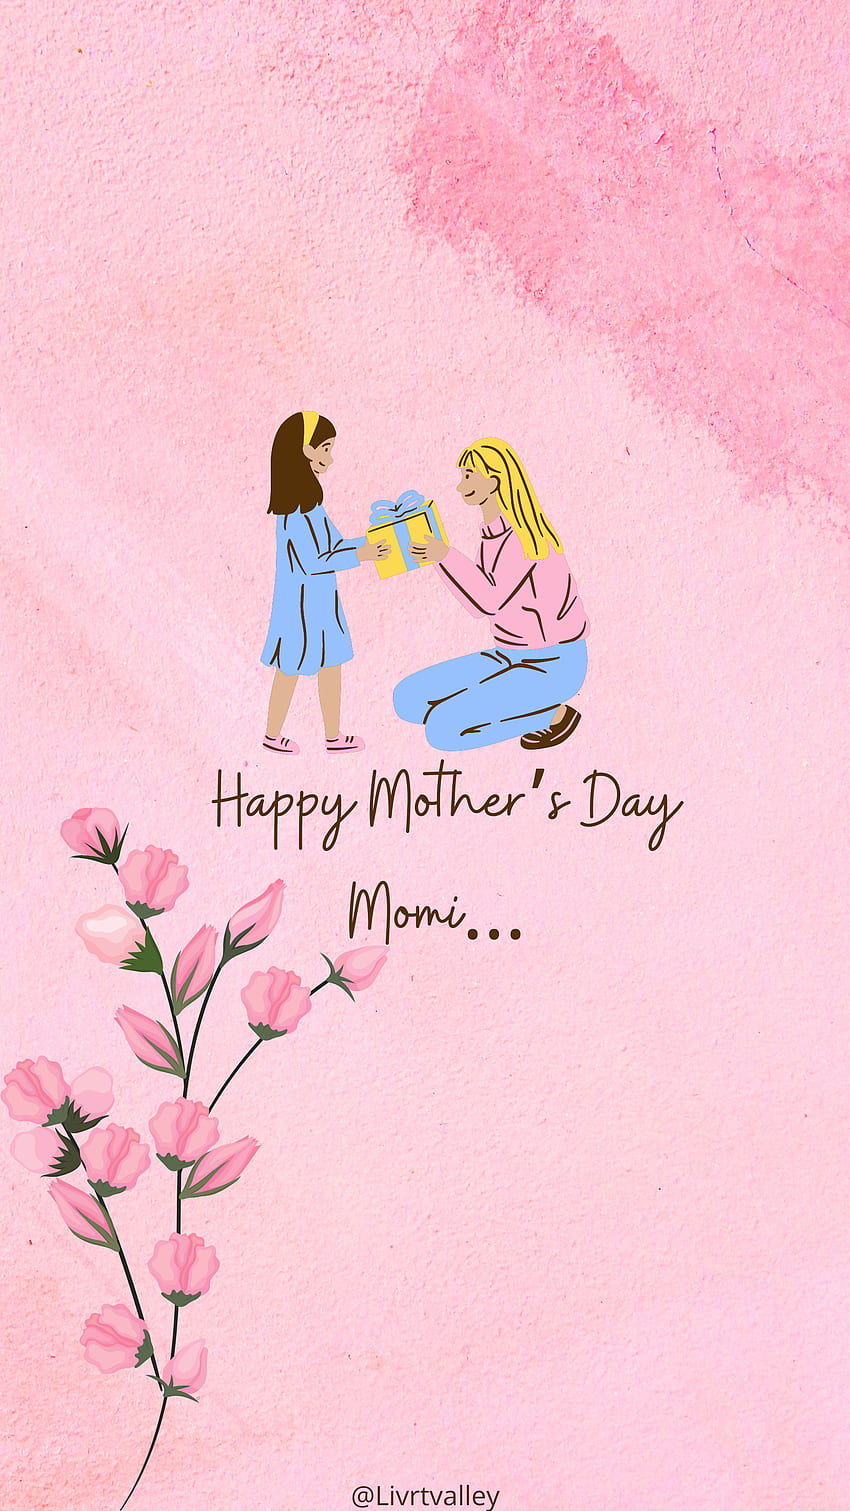 Mother’s Day, bestmom, sweetmom, mother, mothersdaygift, mymom, mom, happymothersday, loveyoumom, mothersday, maa HD phone wallpaper